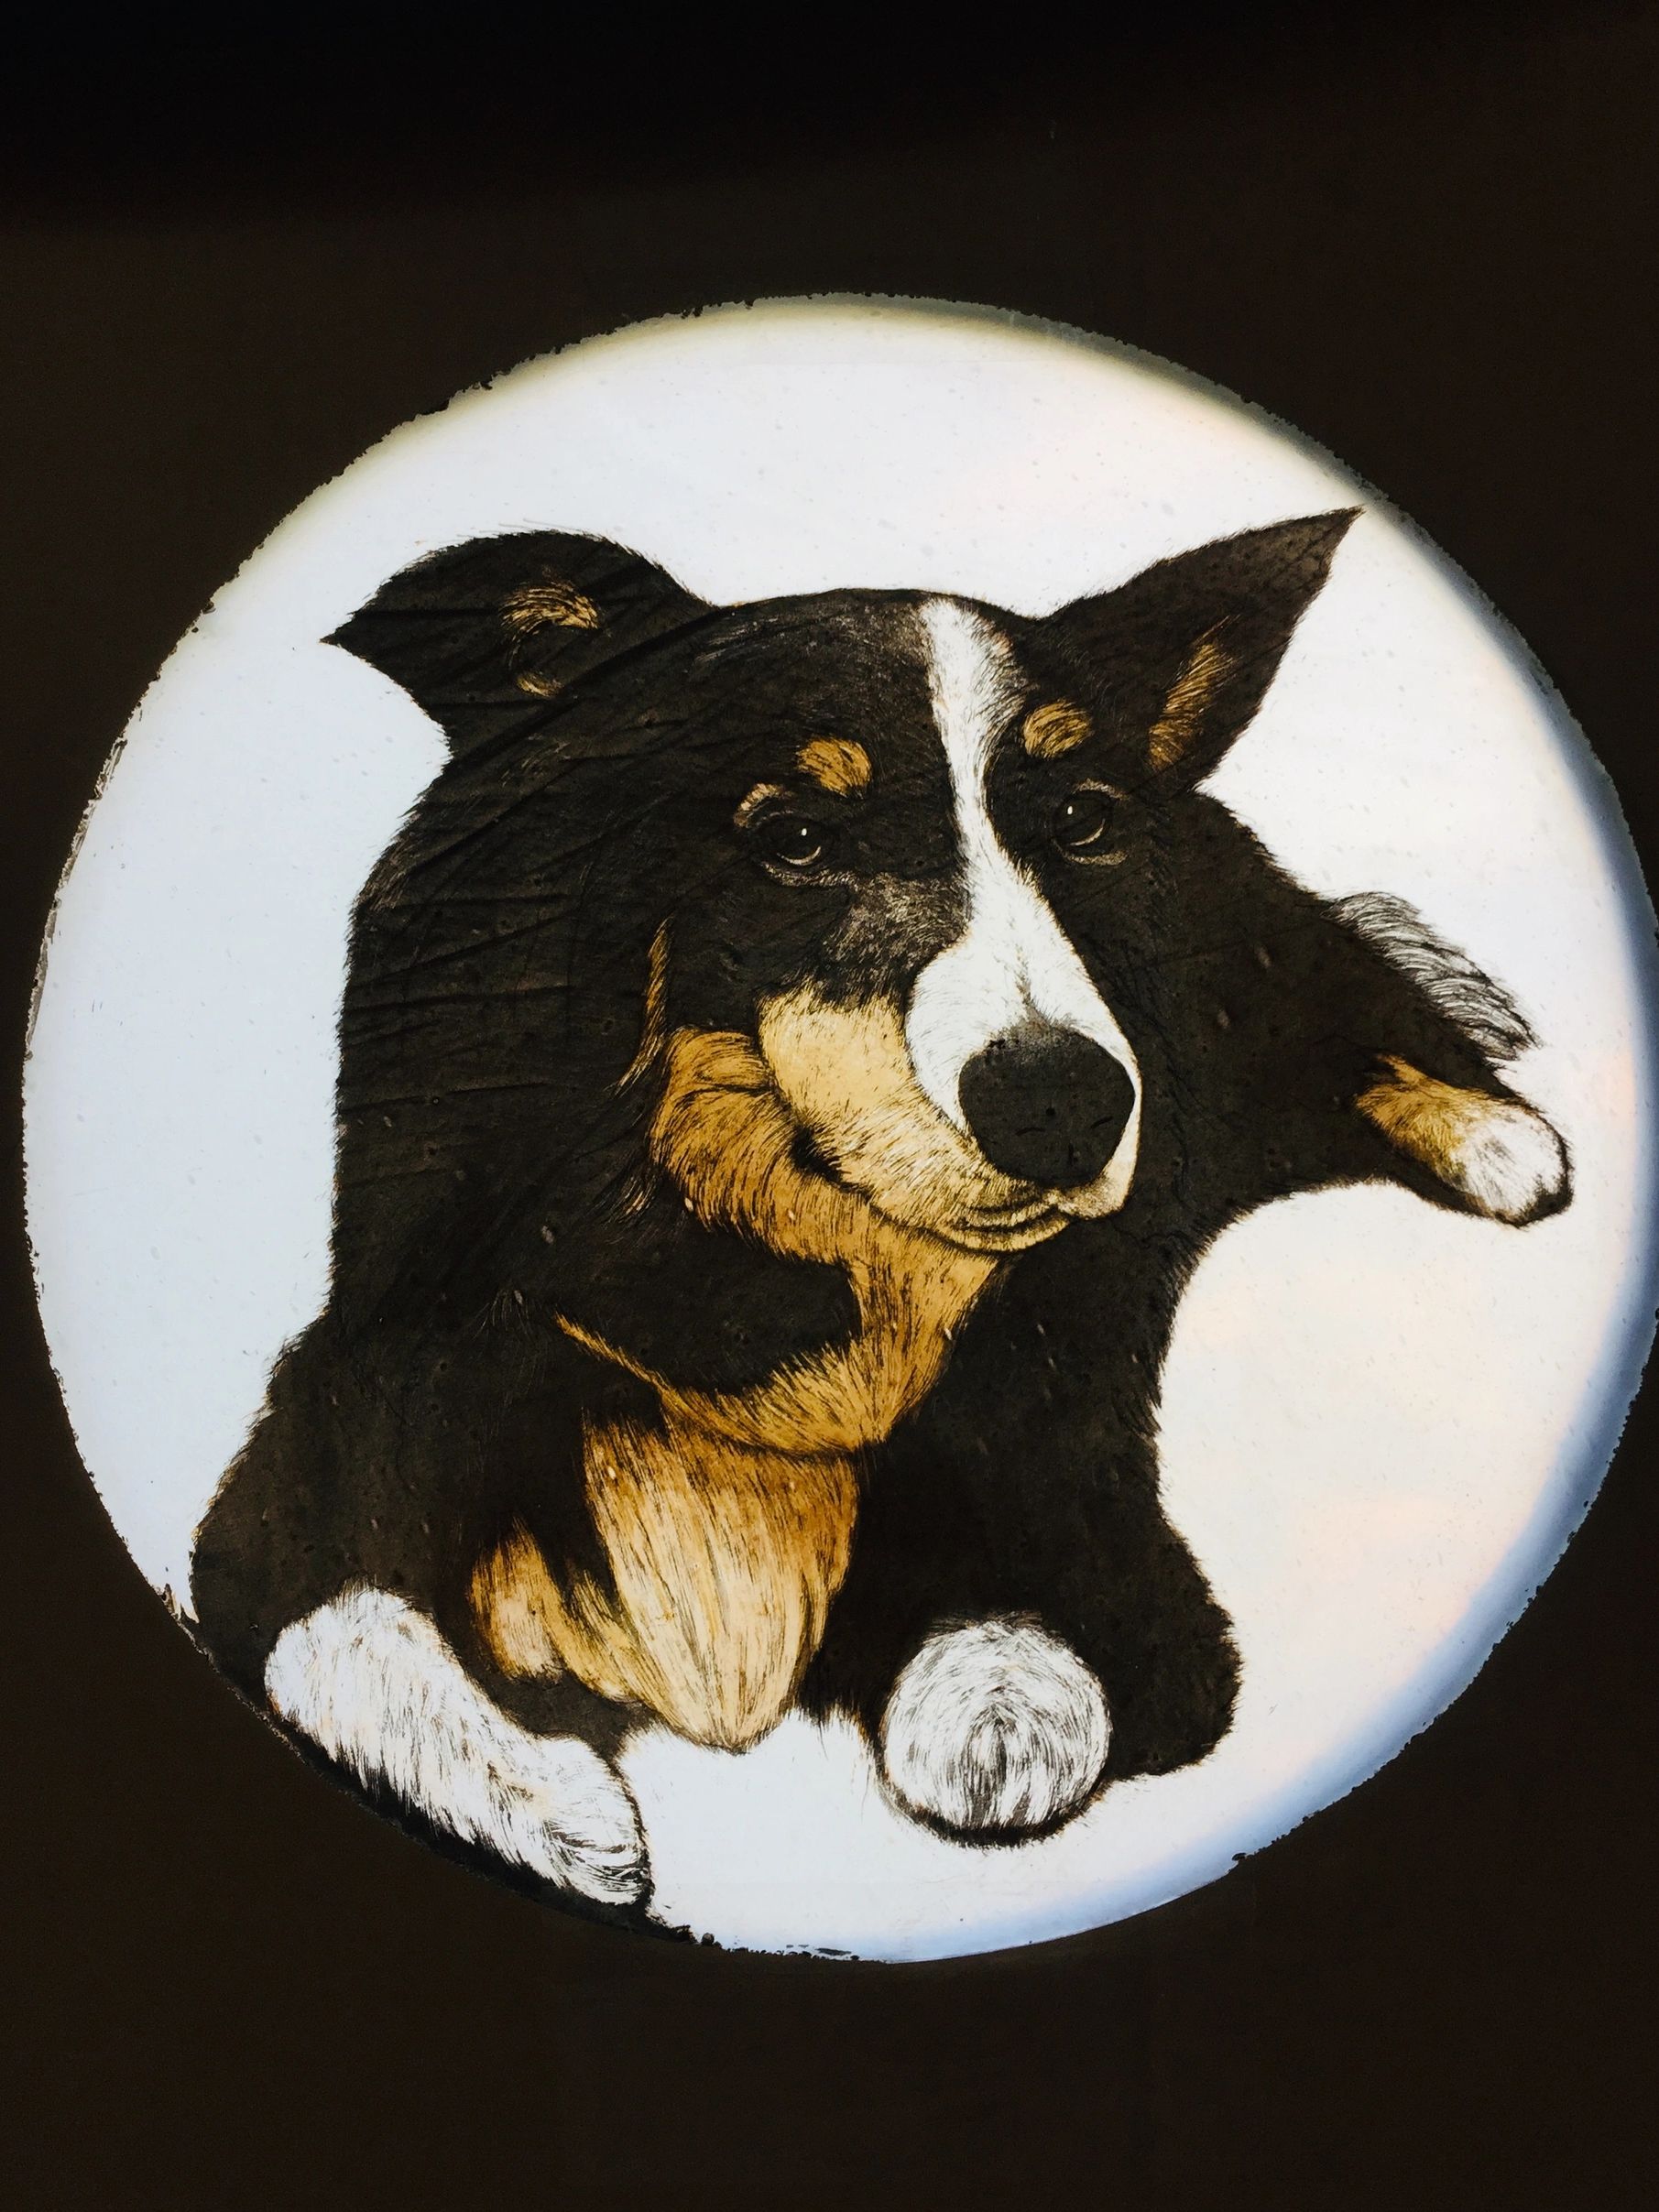 Painted stained glass portrait black dog, with golden chest and white forehead